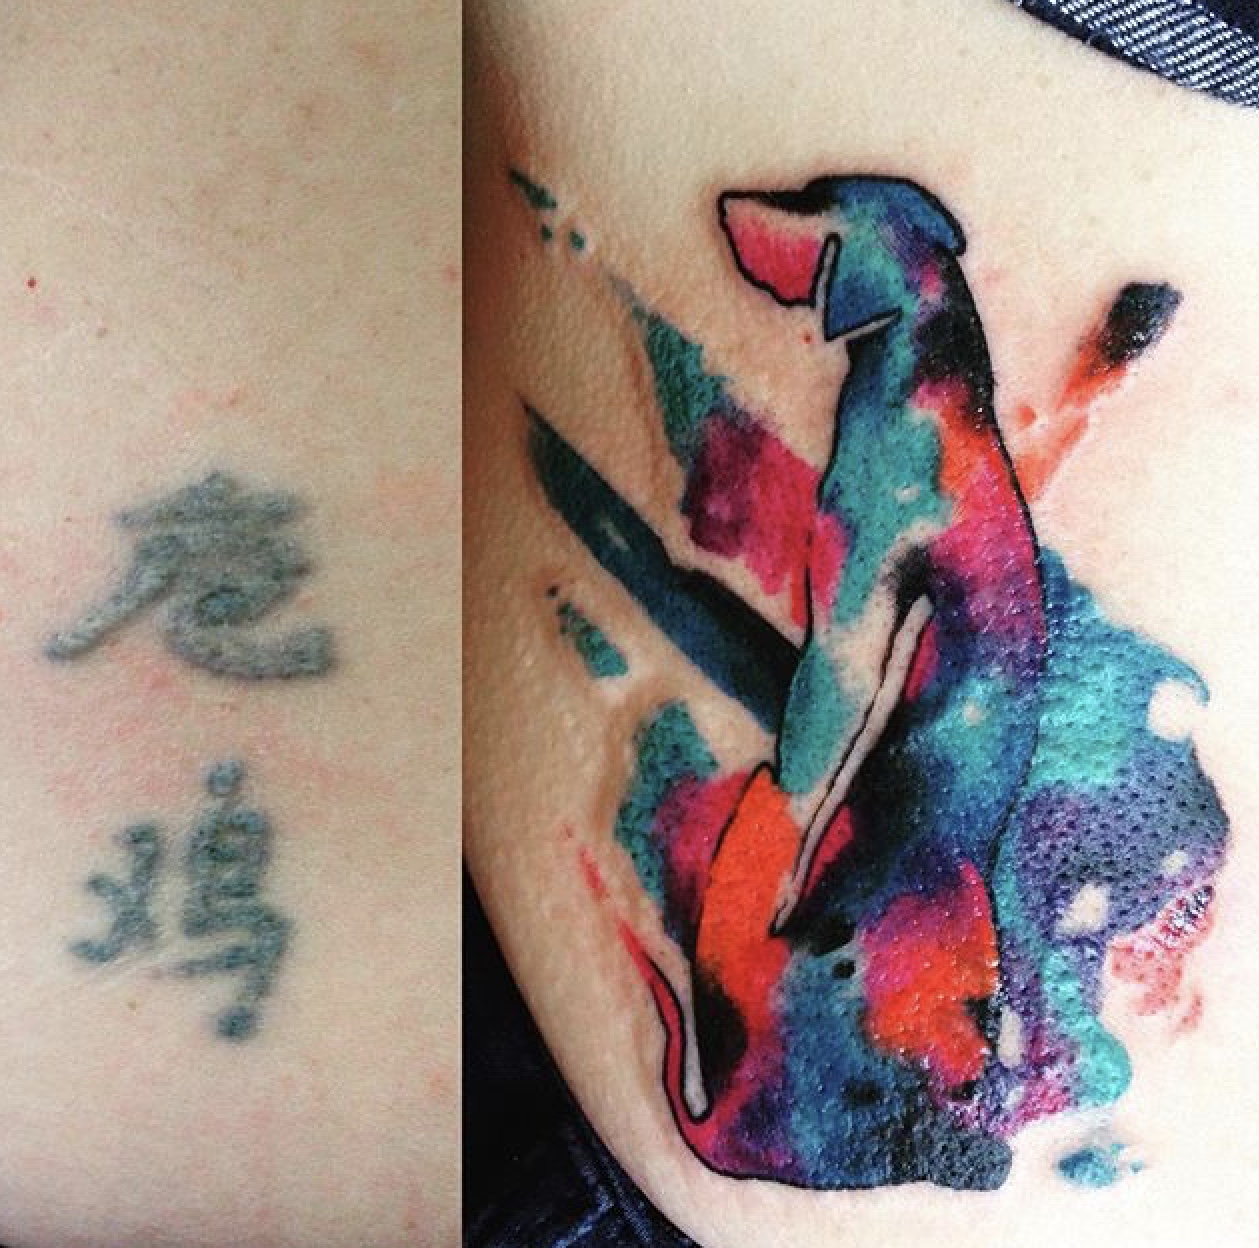 Pink Ink Tattoo Studio  A cover up of a Chinese symbol  Facebook